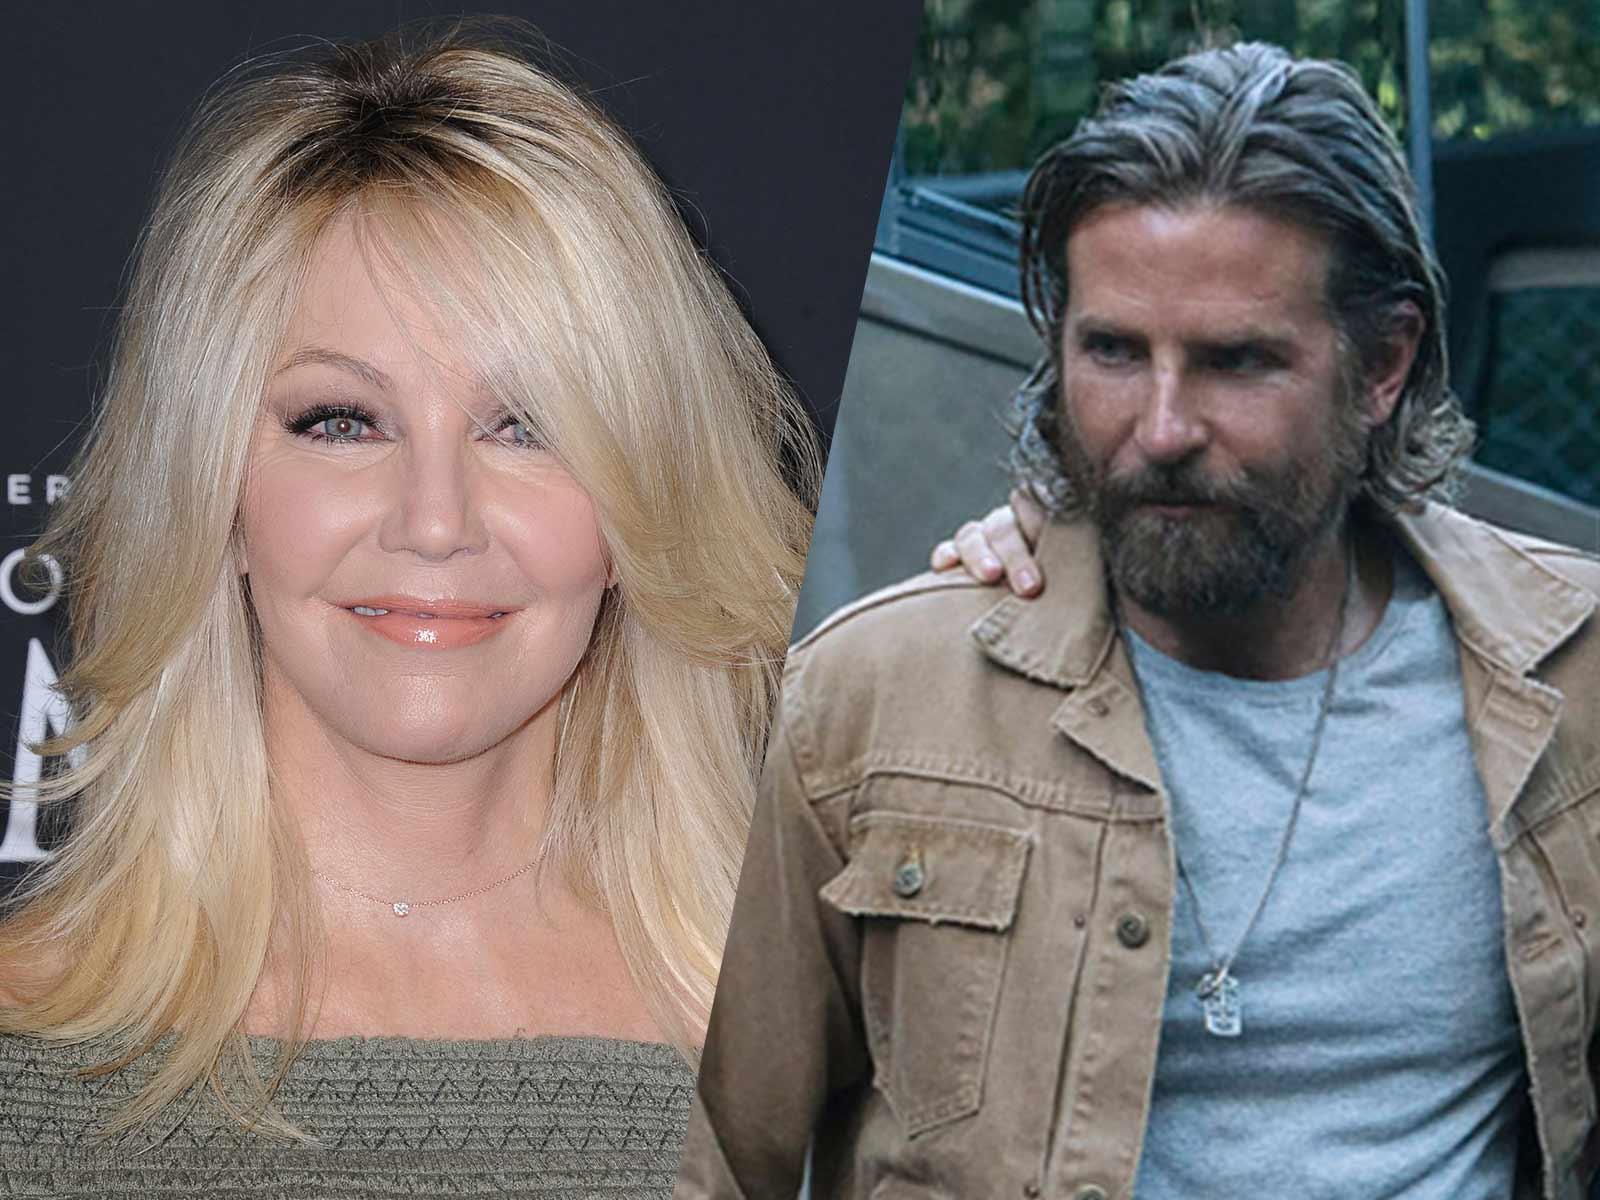 Heather Locklear Wants to Bang Bradley Cooper’s Character Jackson Maine While in Rehab